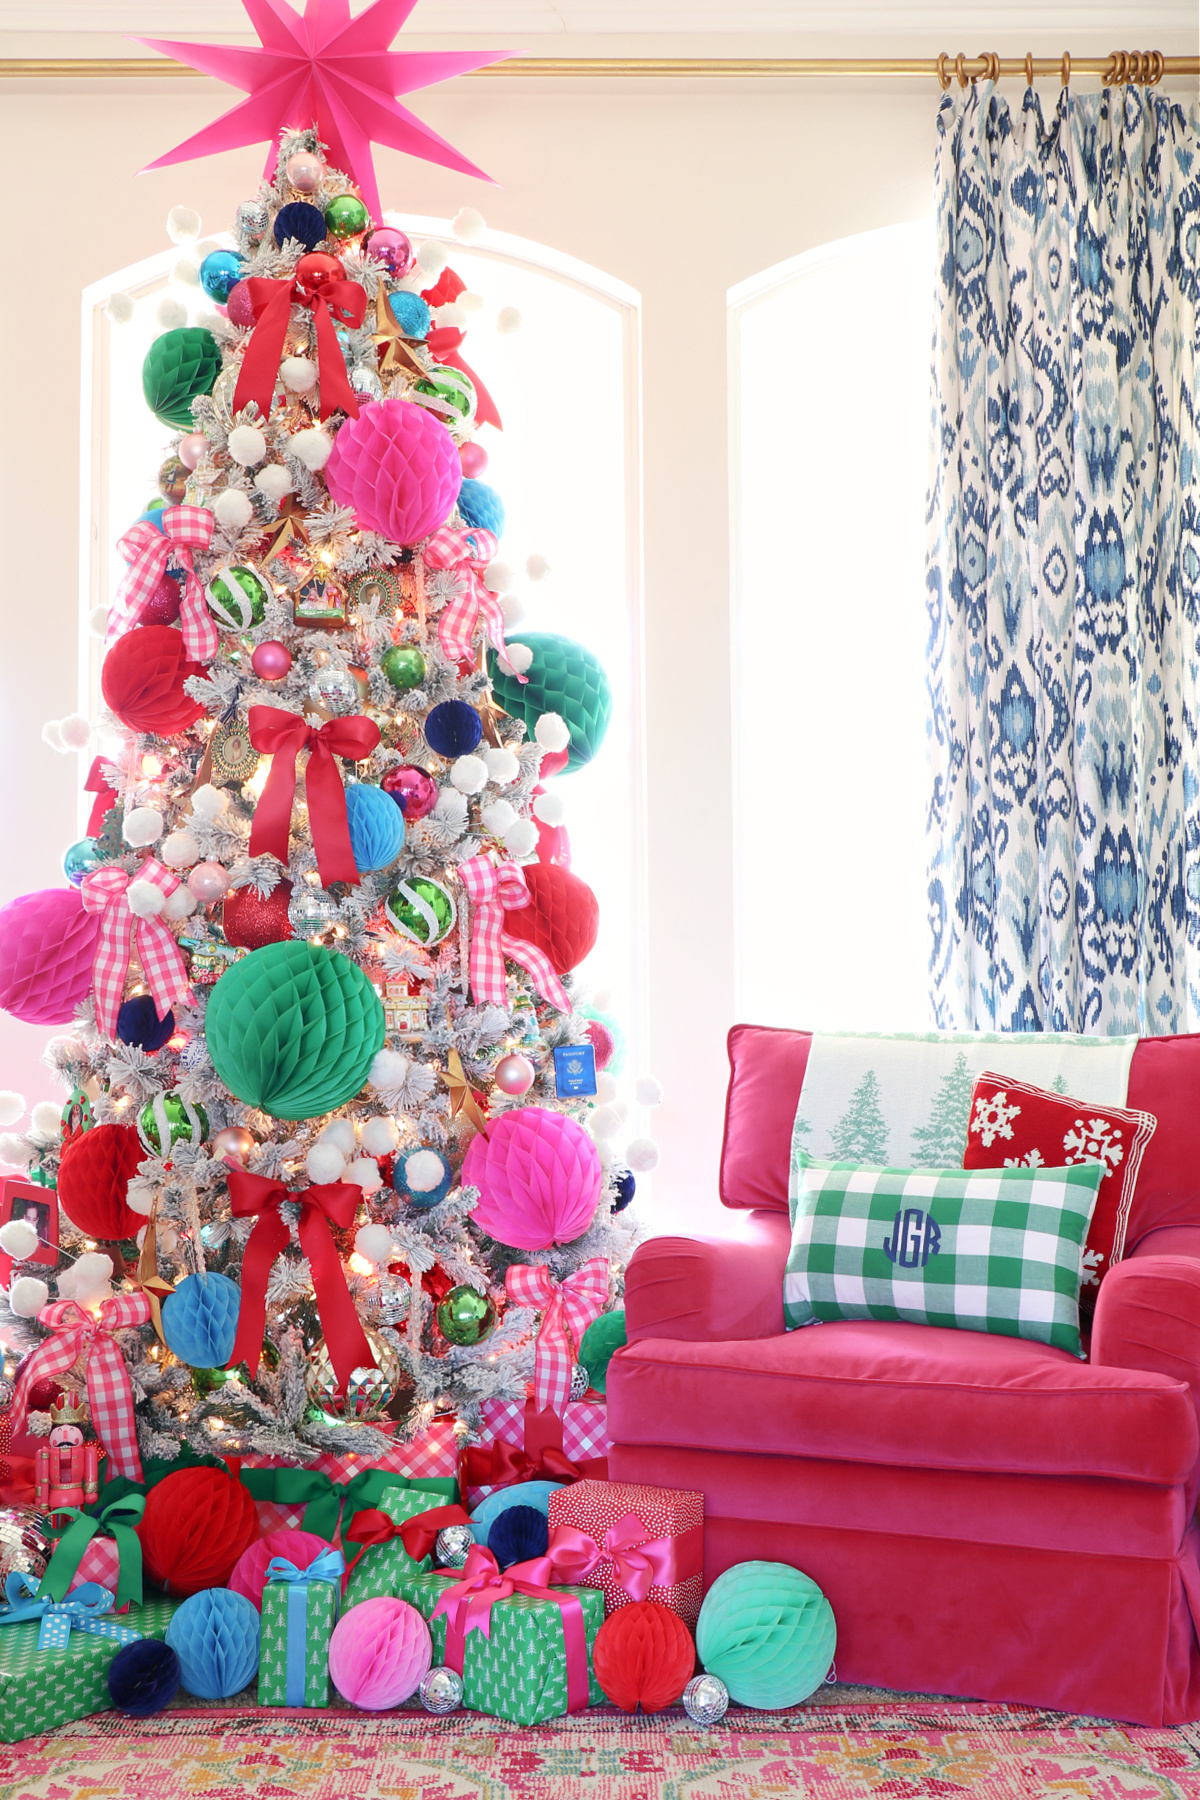 Colorful Christmas Tree Decorations with Tissue Paper Honeycomb Balls and Bows